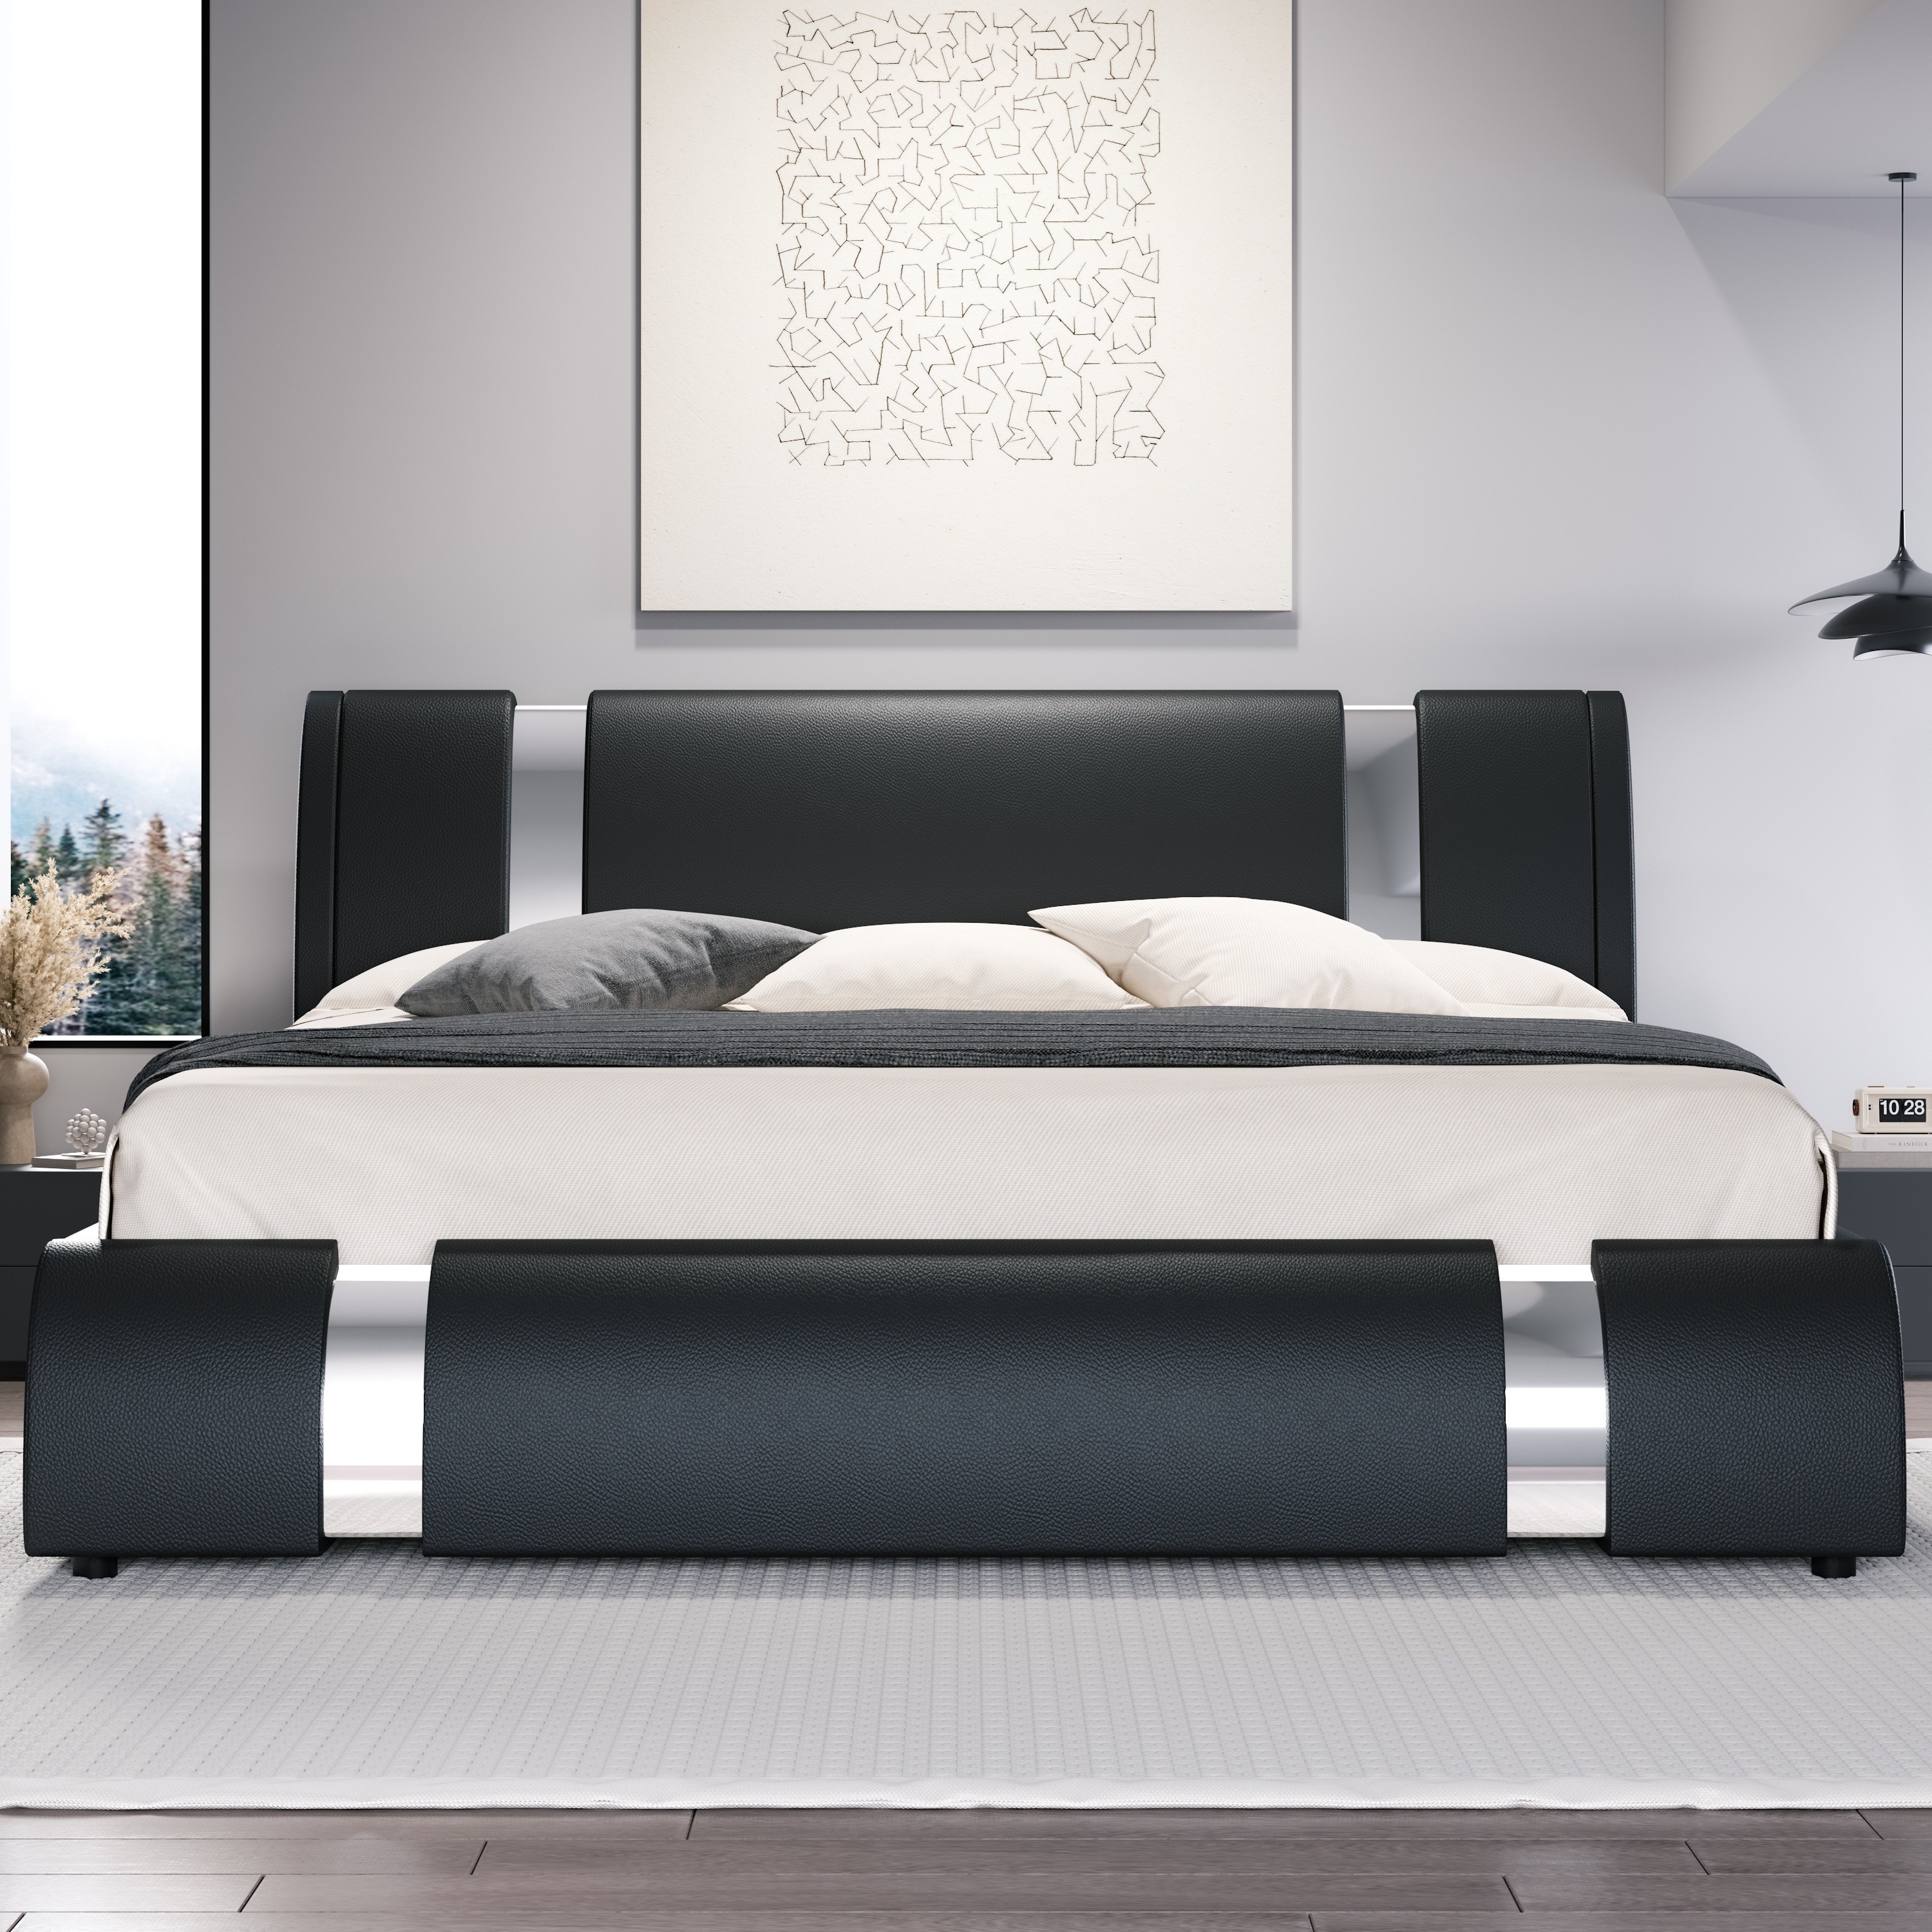 

Hoomic Modern King Faux Leather Bed Frame With Iron Pieces Decor, Low Profile Platform Bed With Height-adjustable Headboard, Solid Wood Slat Support, No Box Spring Needed